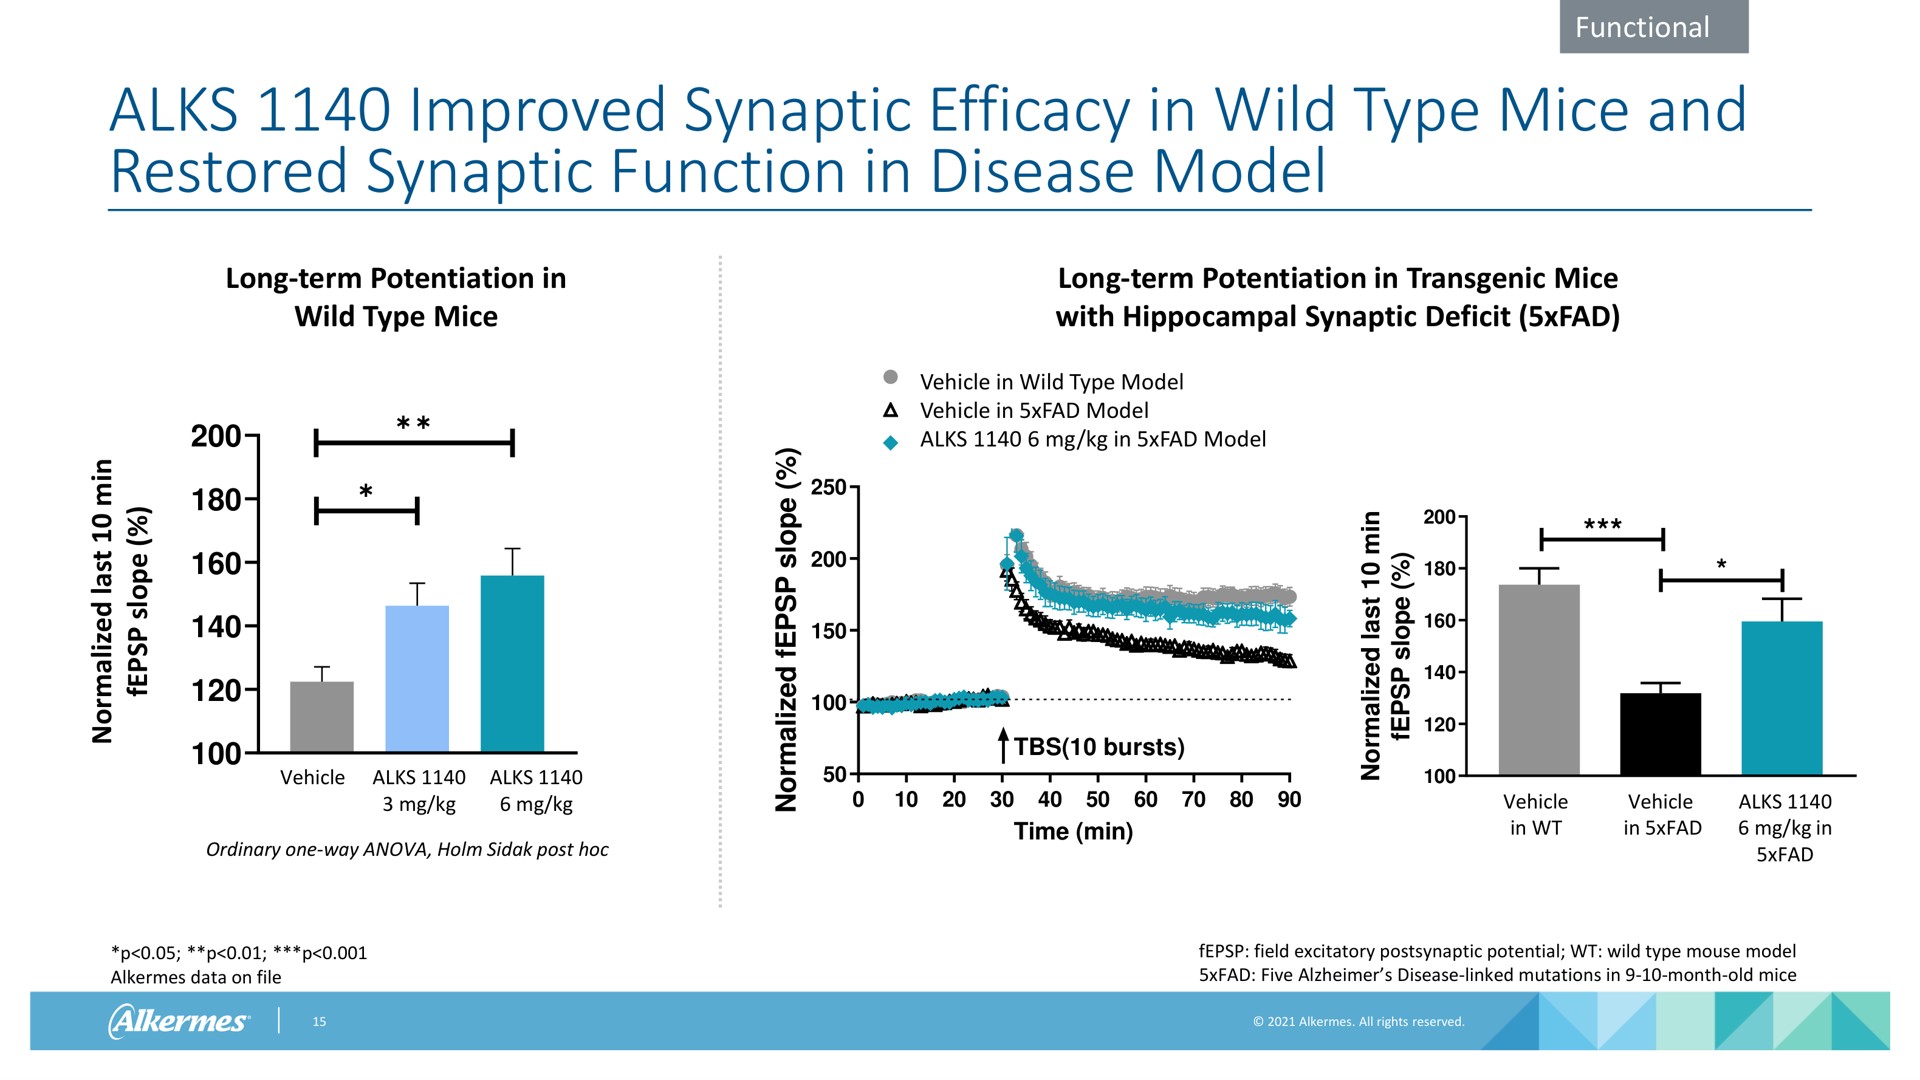 improved synaptic efficacy in wild type mice and restored synaptic function in disease model functional long term potentiation in wild type mice long term potentiation in mice with hippocampal synaptic deficit vehicle in wild type model vehicle in model in model vehicle ordinary one way holm post vehicle in vehicle in in alkermes data on file field excitatory postsynaptic potential wild type mouse model five disease linked mutations in month old mice a so bursts go | Alkermes